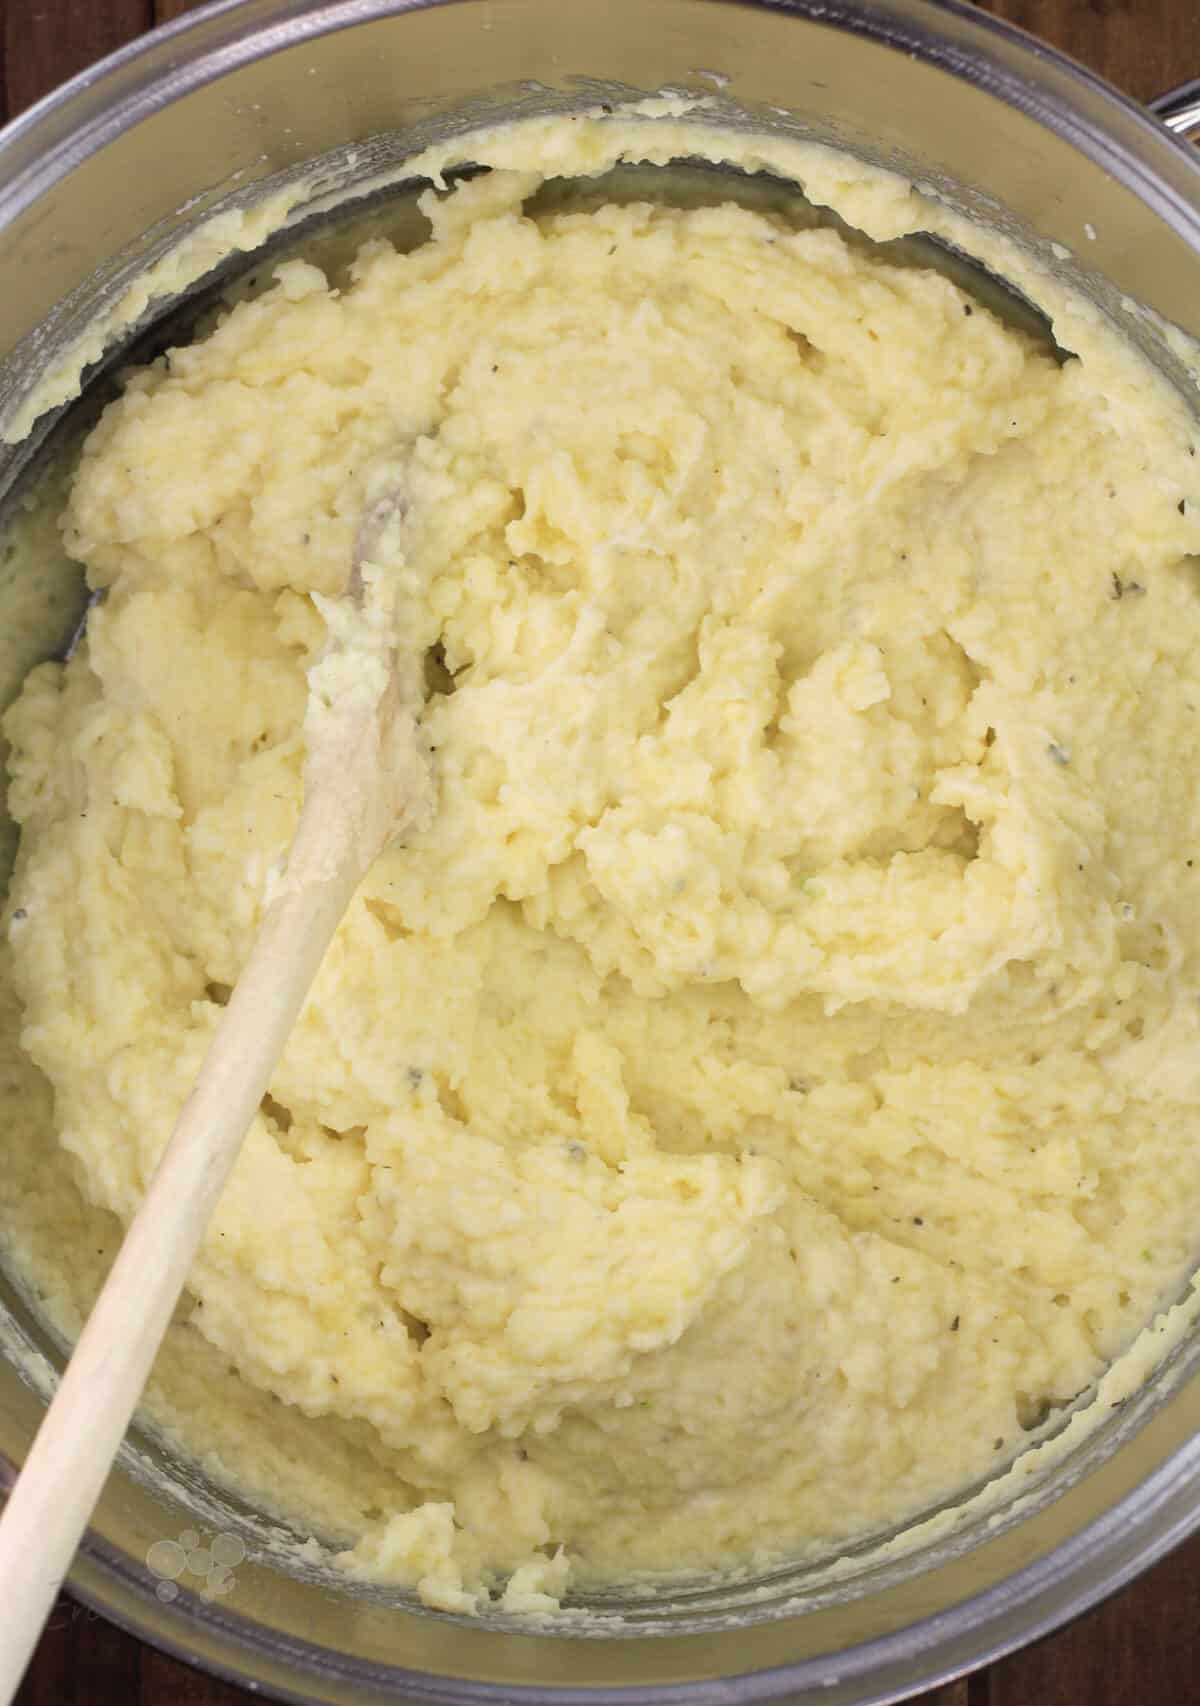 boursin mashed potatoes after combining ingredients